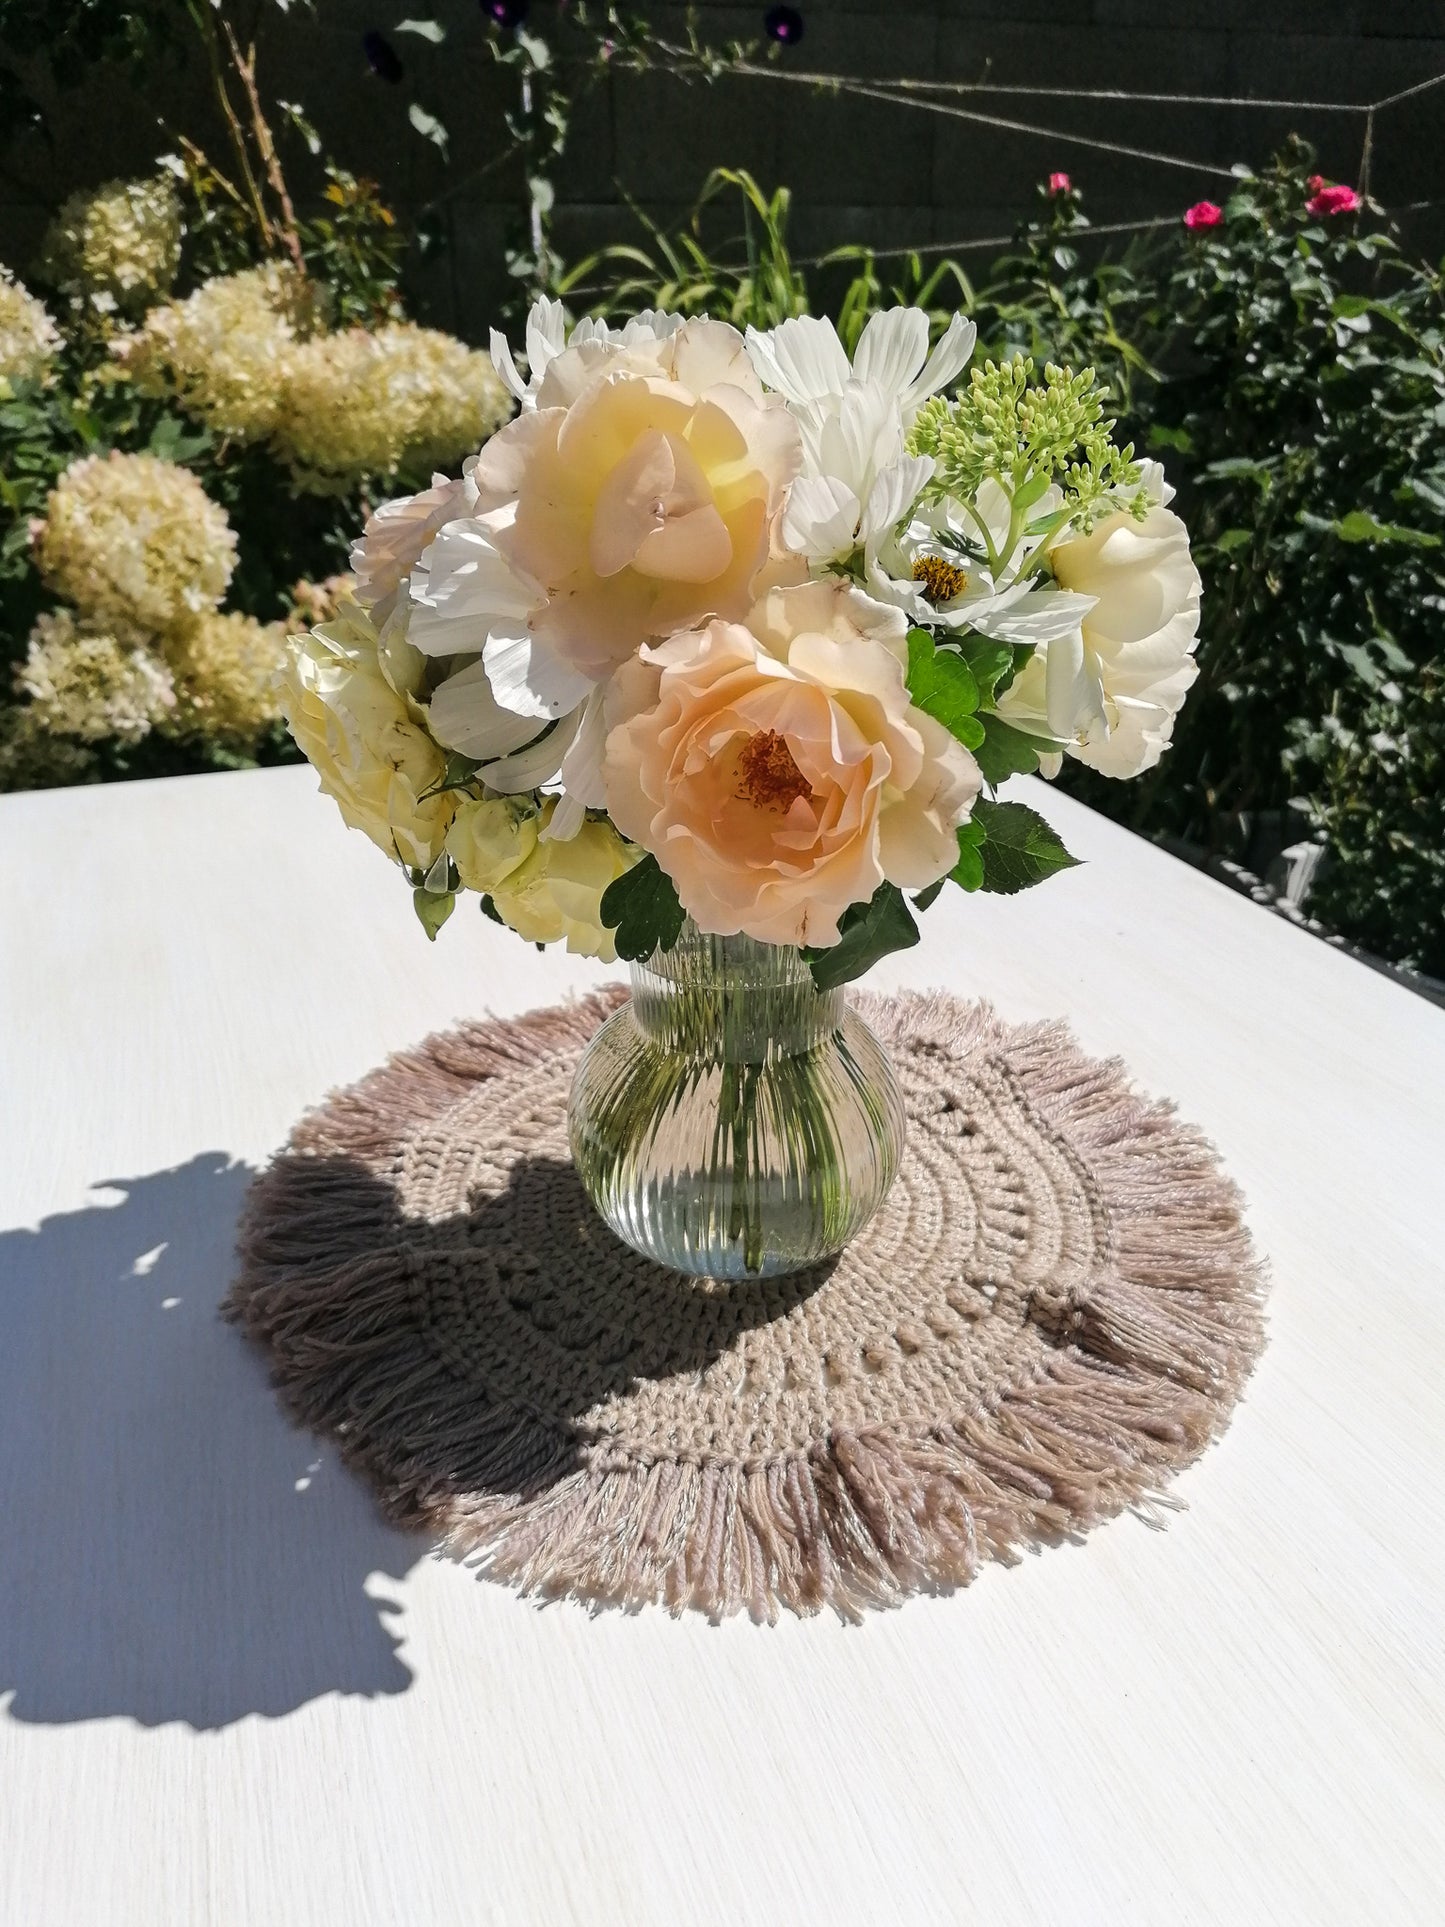 Brown doily - large